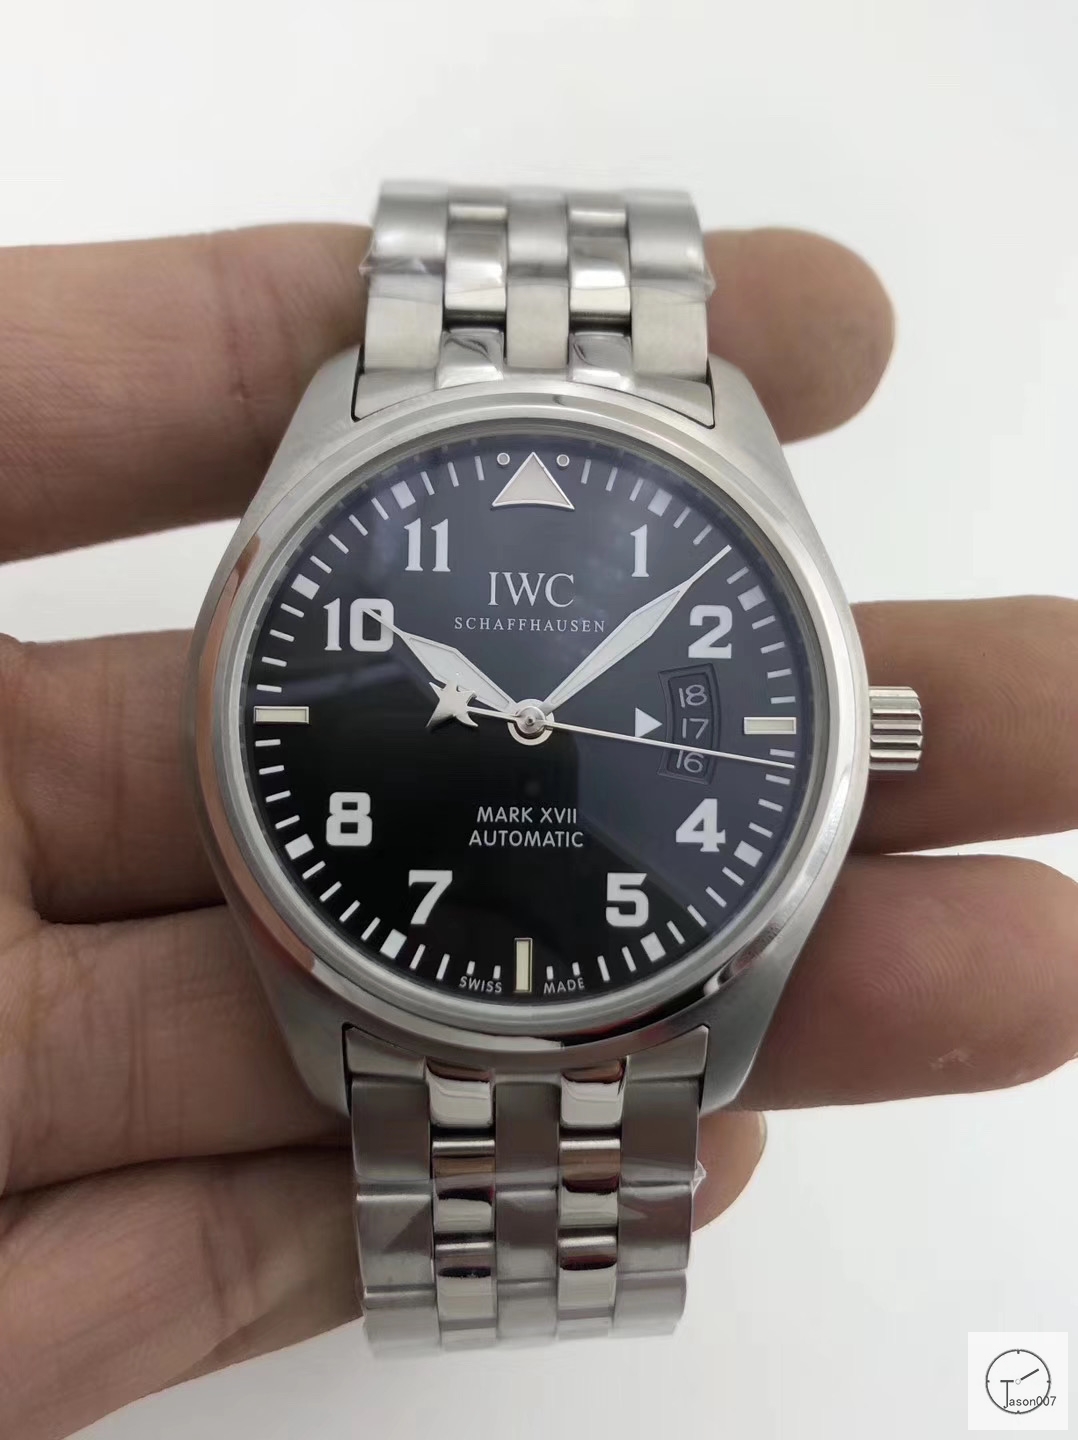 IWC PILOT'S SCHAFFHAUSEN Mark XV2 WATCH AUTOMATIC SPITFIRE AUTOMATIC Mechical IW326803 42MM BLACK DIAL Everose Gold Case Stainless Steel Case Rubber Strap Mens Wristwatches ICW22170560